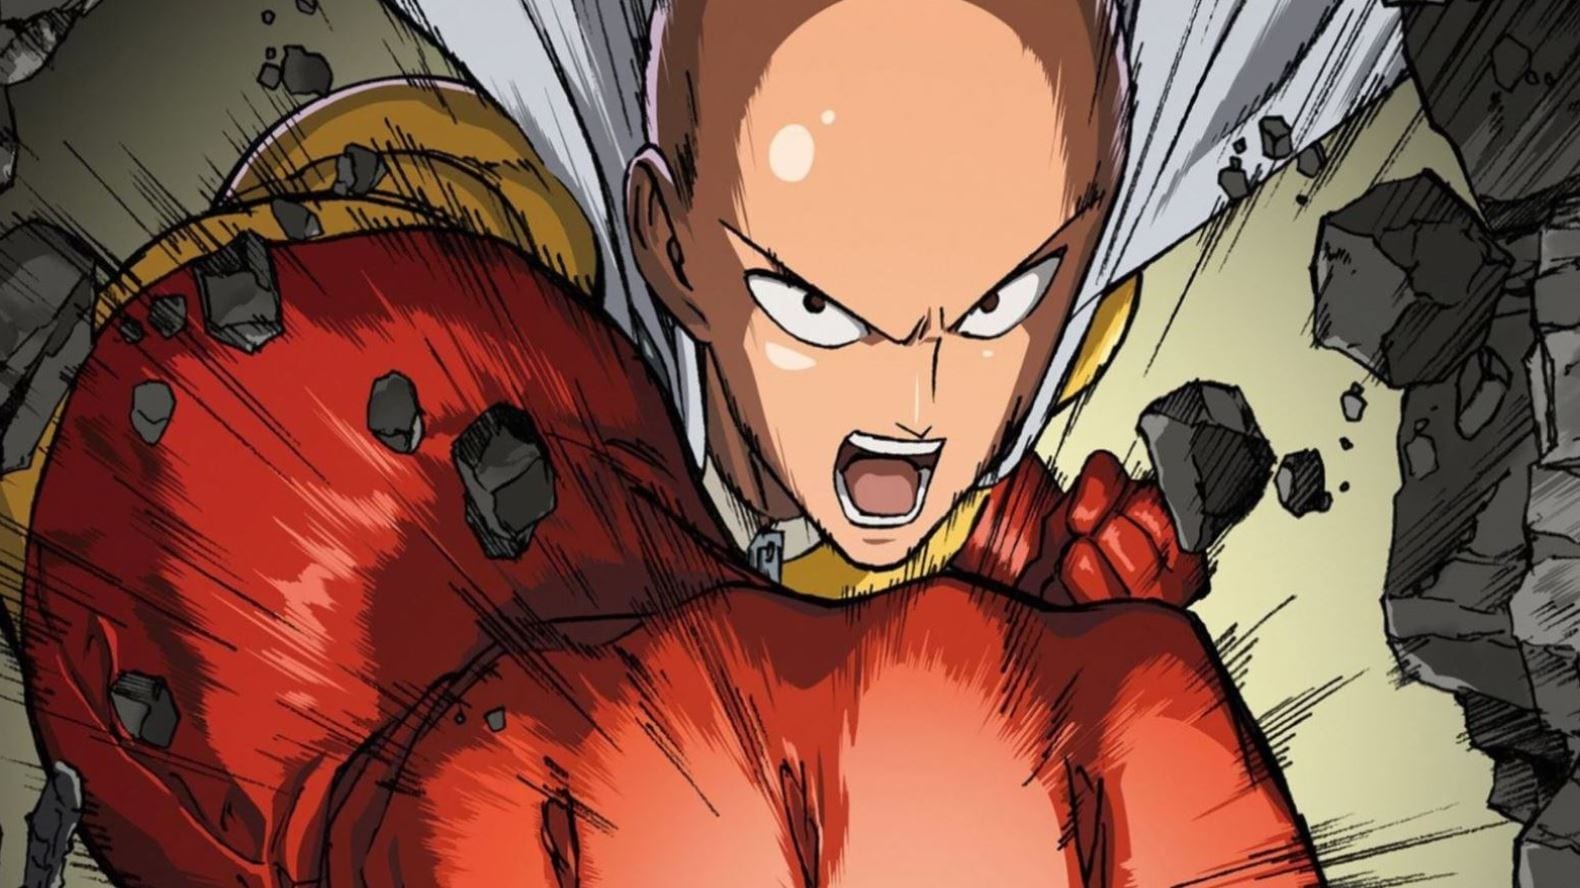 One-Punch Man Season 3: When It's Happening And Where You Can Watch It